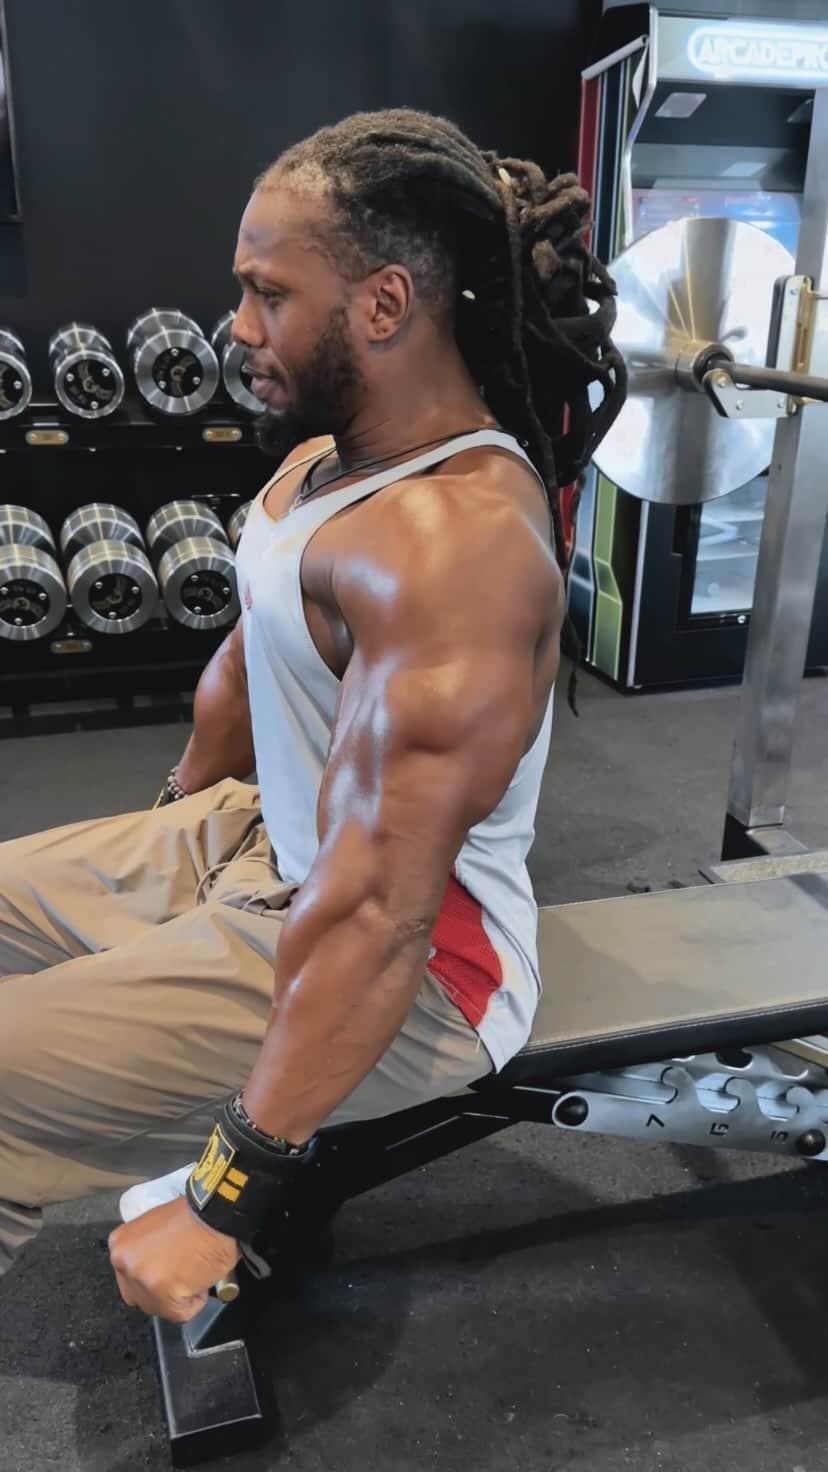 Ulissesworldのインスタグラム：「Come train Triceps with me 💪🏾🔥  If you’re looking to define that horseshoe and get those triceps popping Give this workout a try ✌🏽The triceps make up 70% of an arm's total mass, making it the best muscle for filling shirt sleeves. So here’s the perfect tricep workout to get that fuller arm pump 🔥  Exercises: 1. Triceps Rope Press-downs  2. Weighted bodyweight dips 3. Superset with weighted bench dips 4. Drop-set bench dips 5. Finish with close grip bench press」